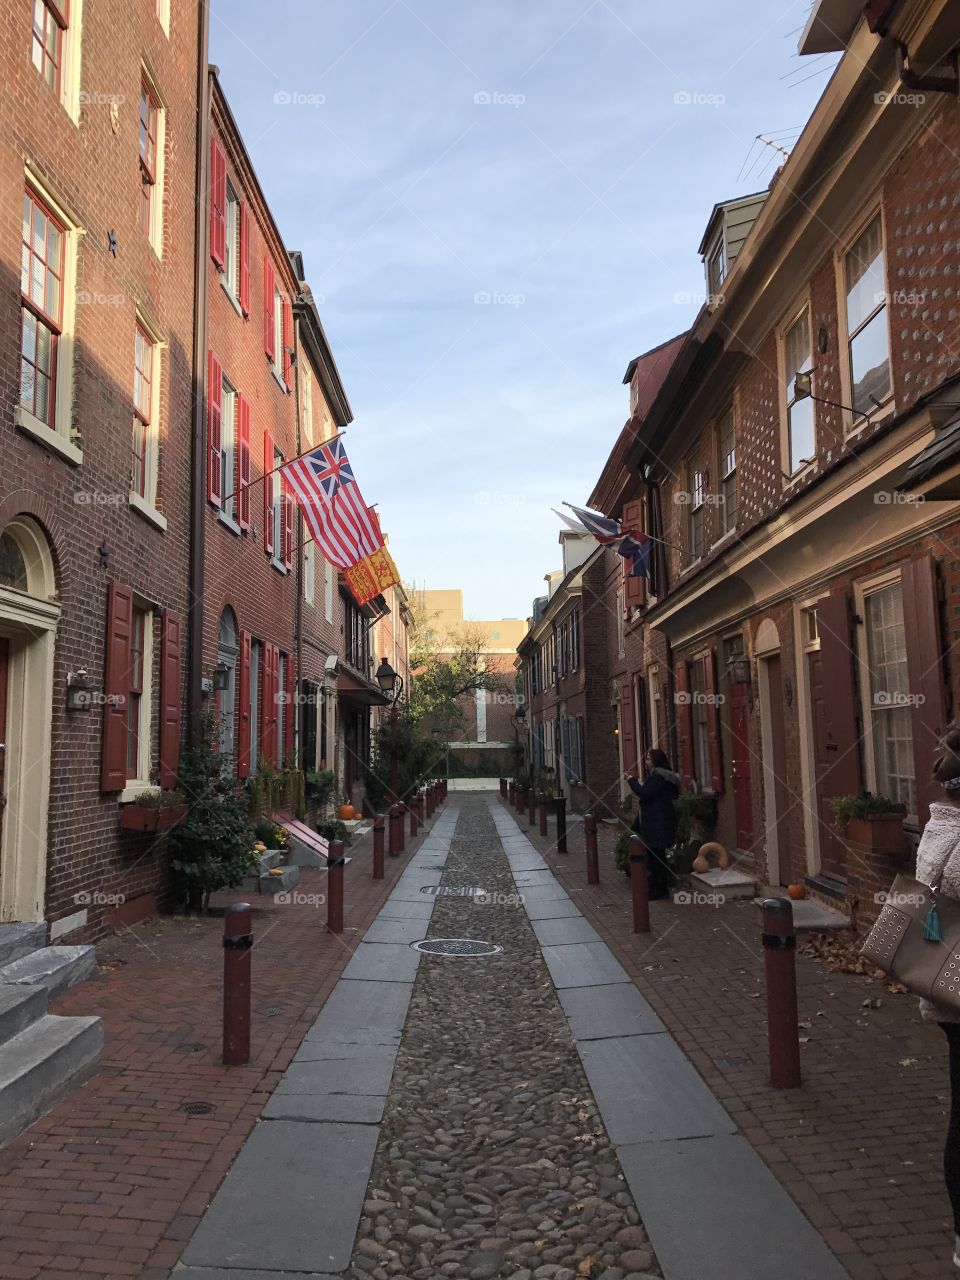 Elfreth's Alley on a chilly but beautiful day